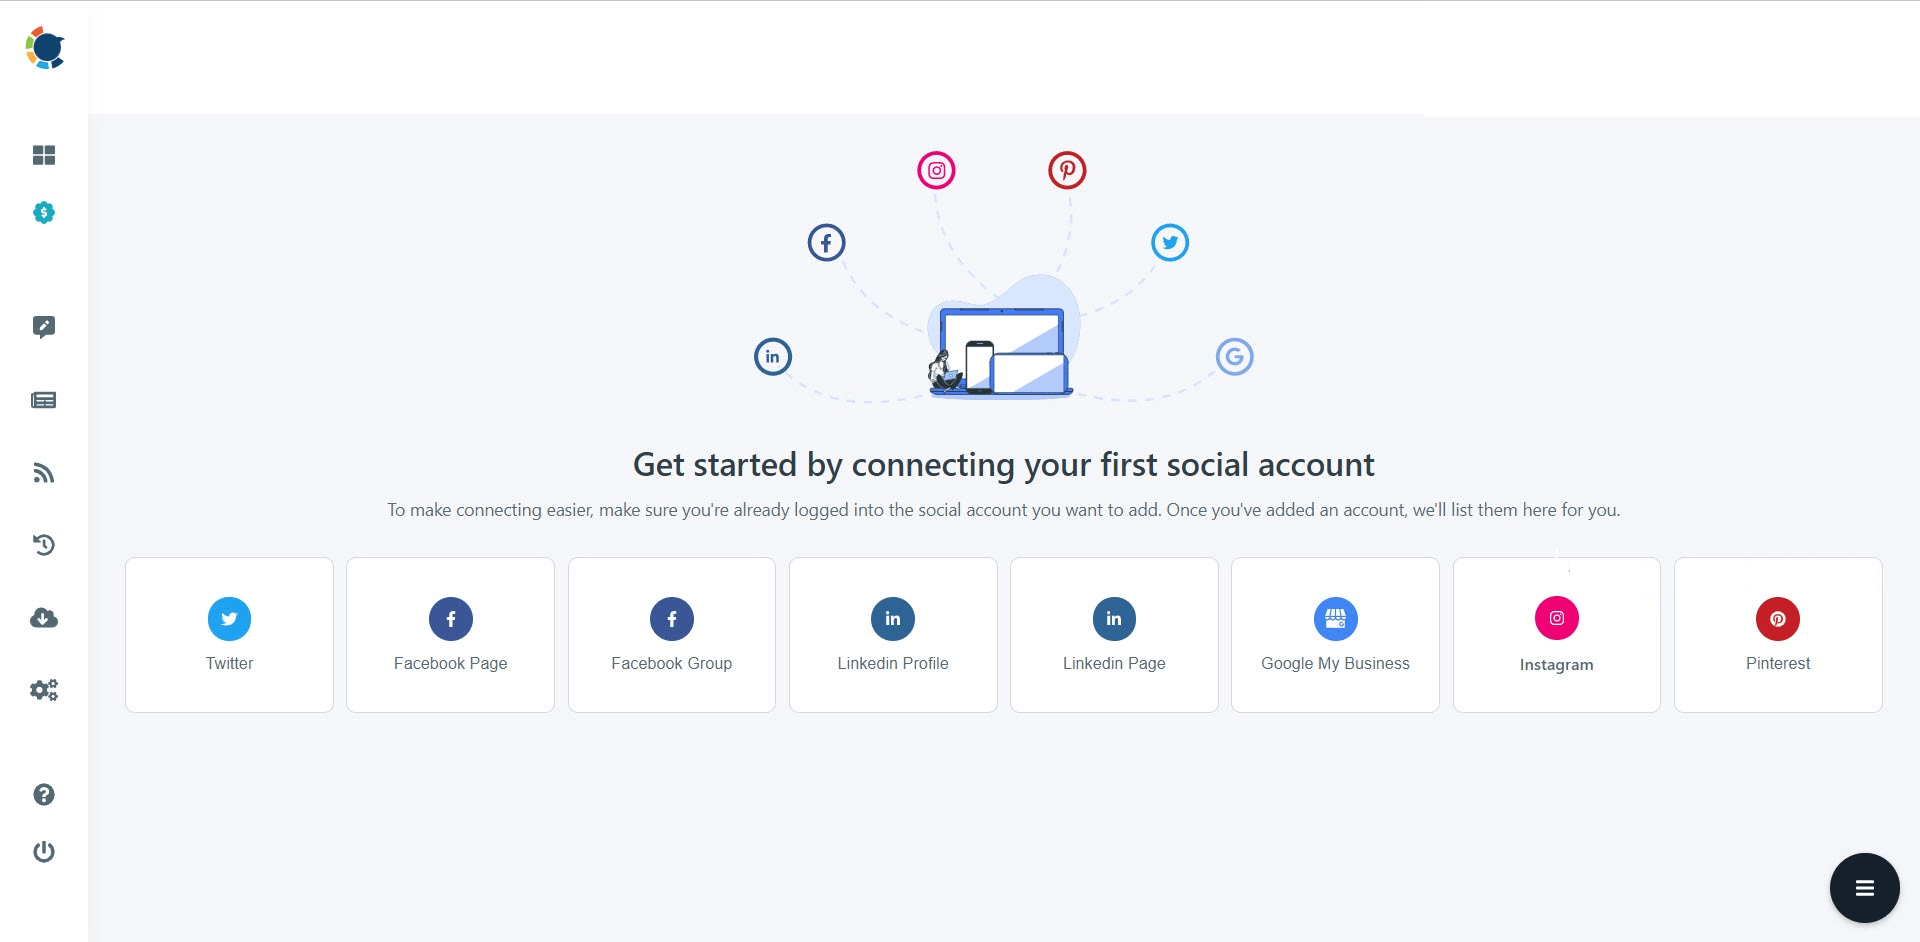 Circleboom Publish supports Twitter, Instagram, Facebook, LinkedIn, Pinterest, and Google Business Profile on the same dashboard.